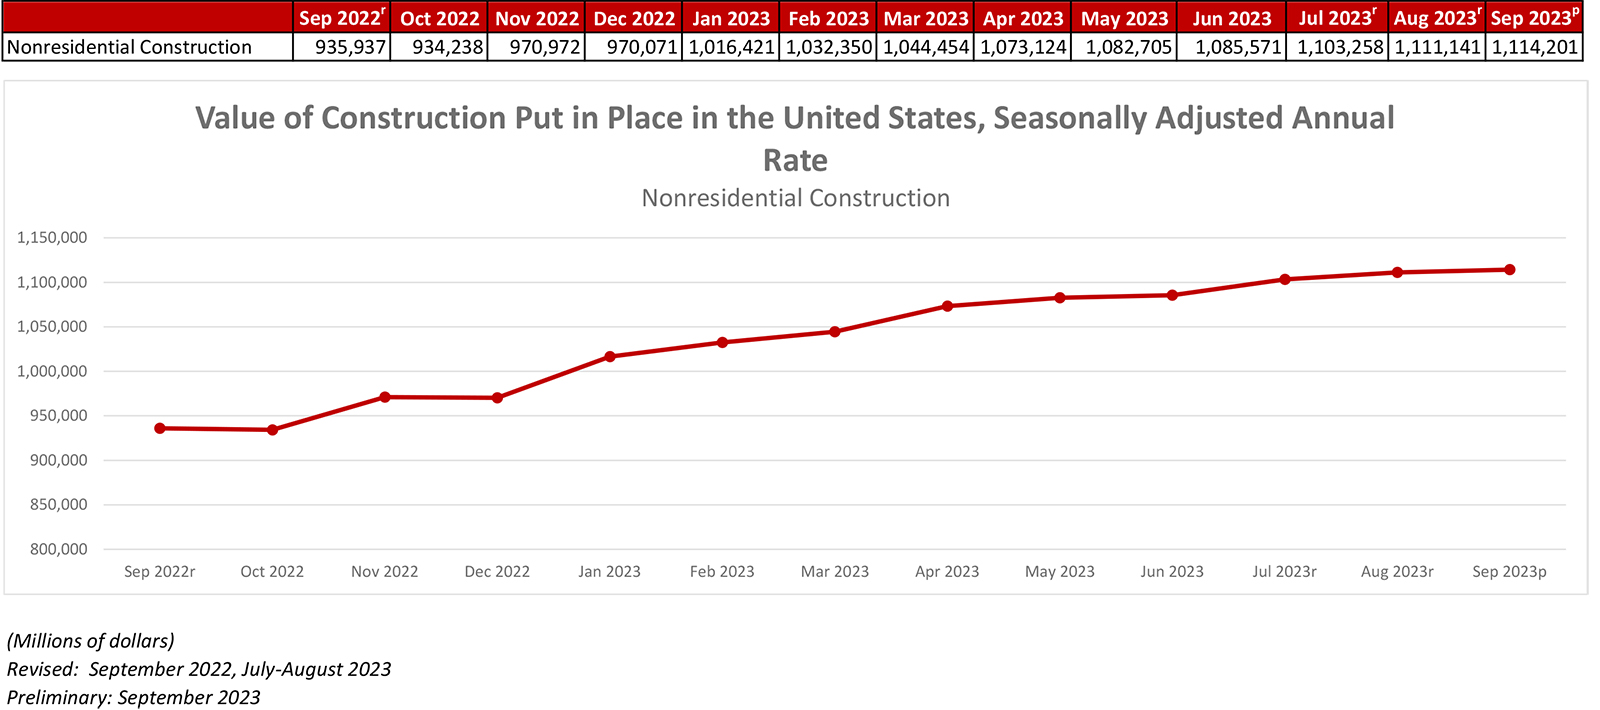 Nonresidential Construction Spending Increases for 16th Straight Month